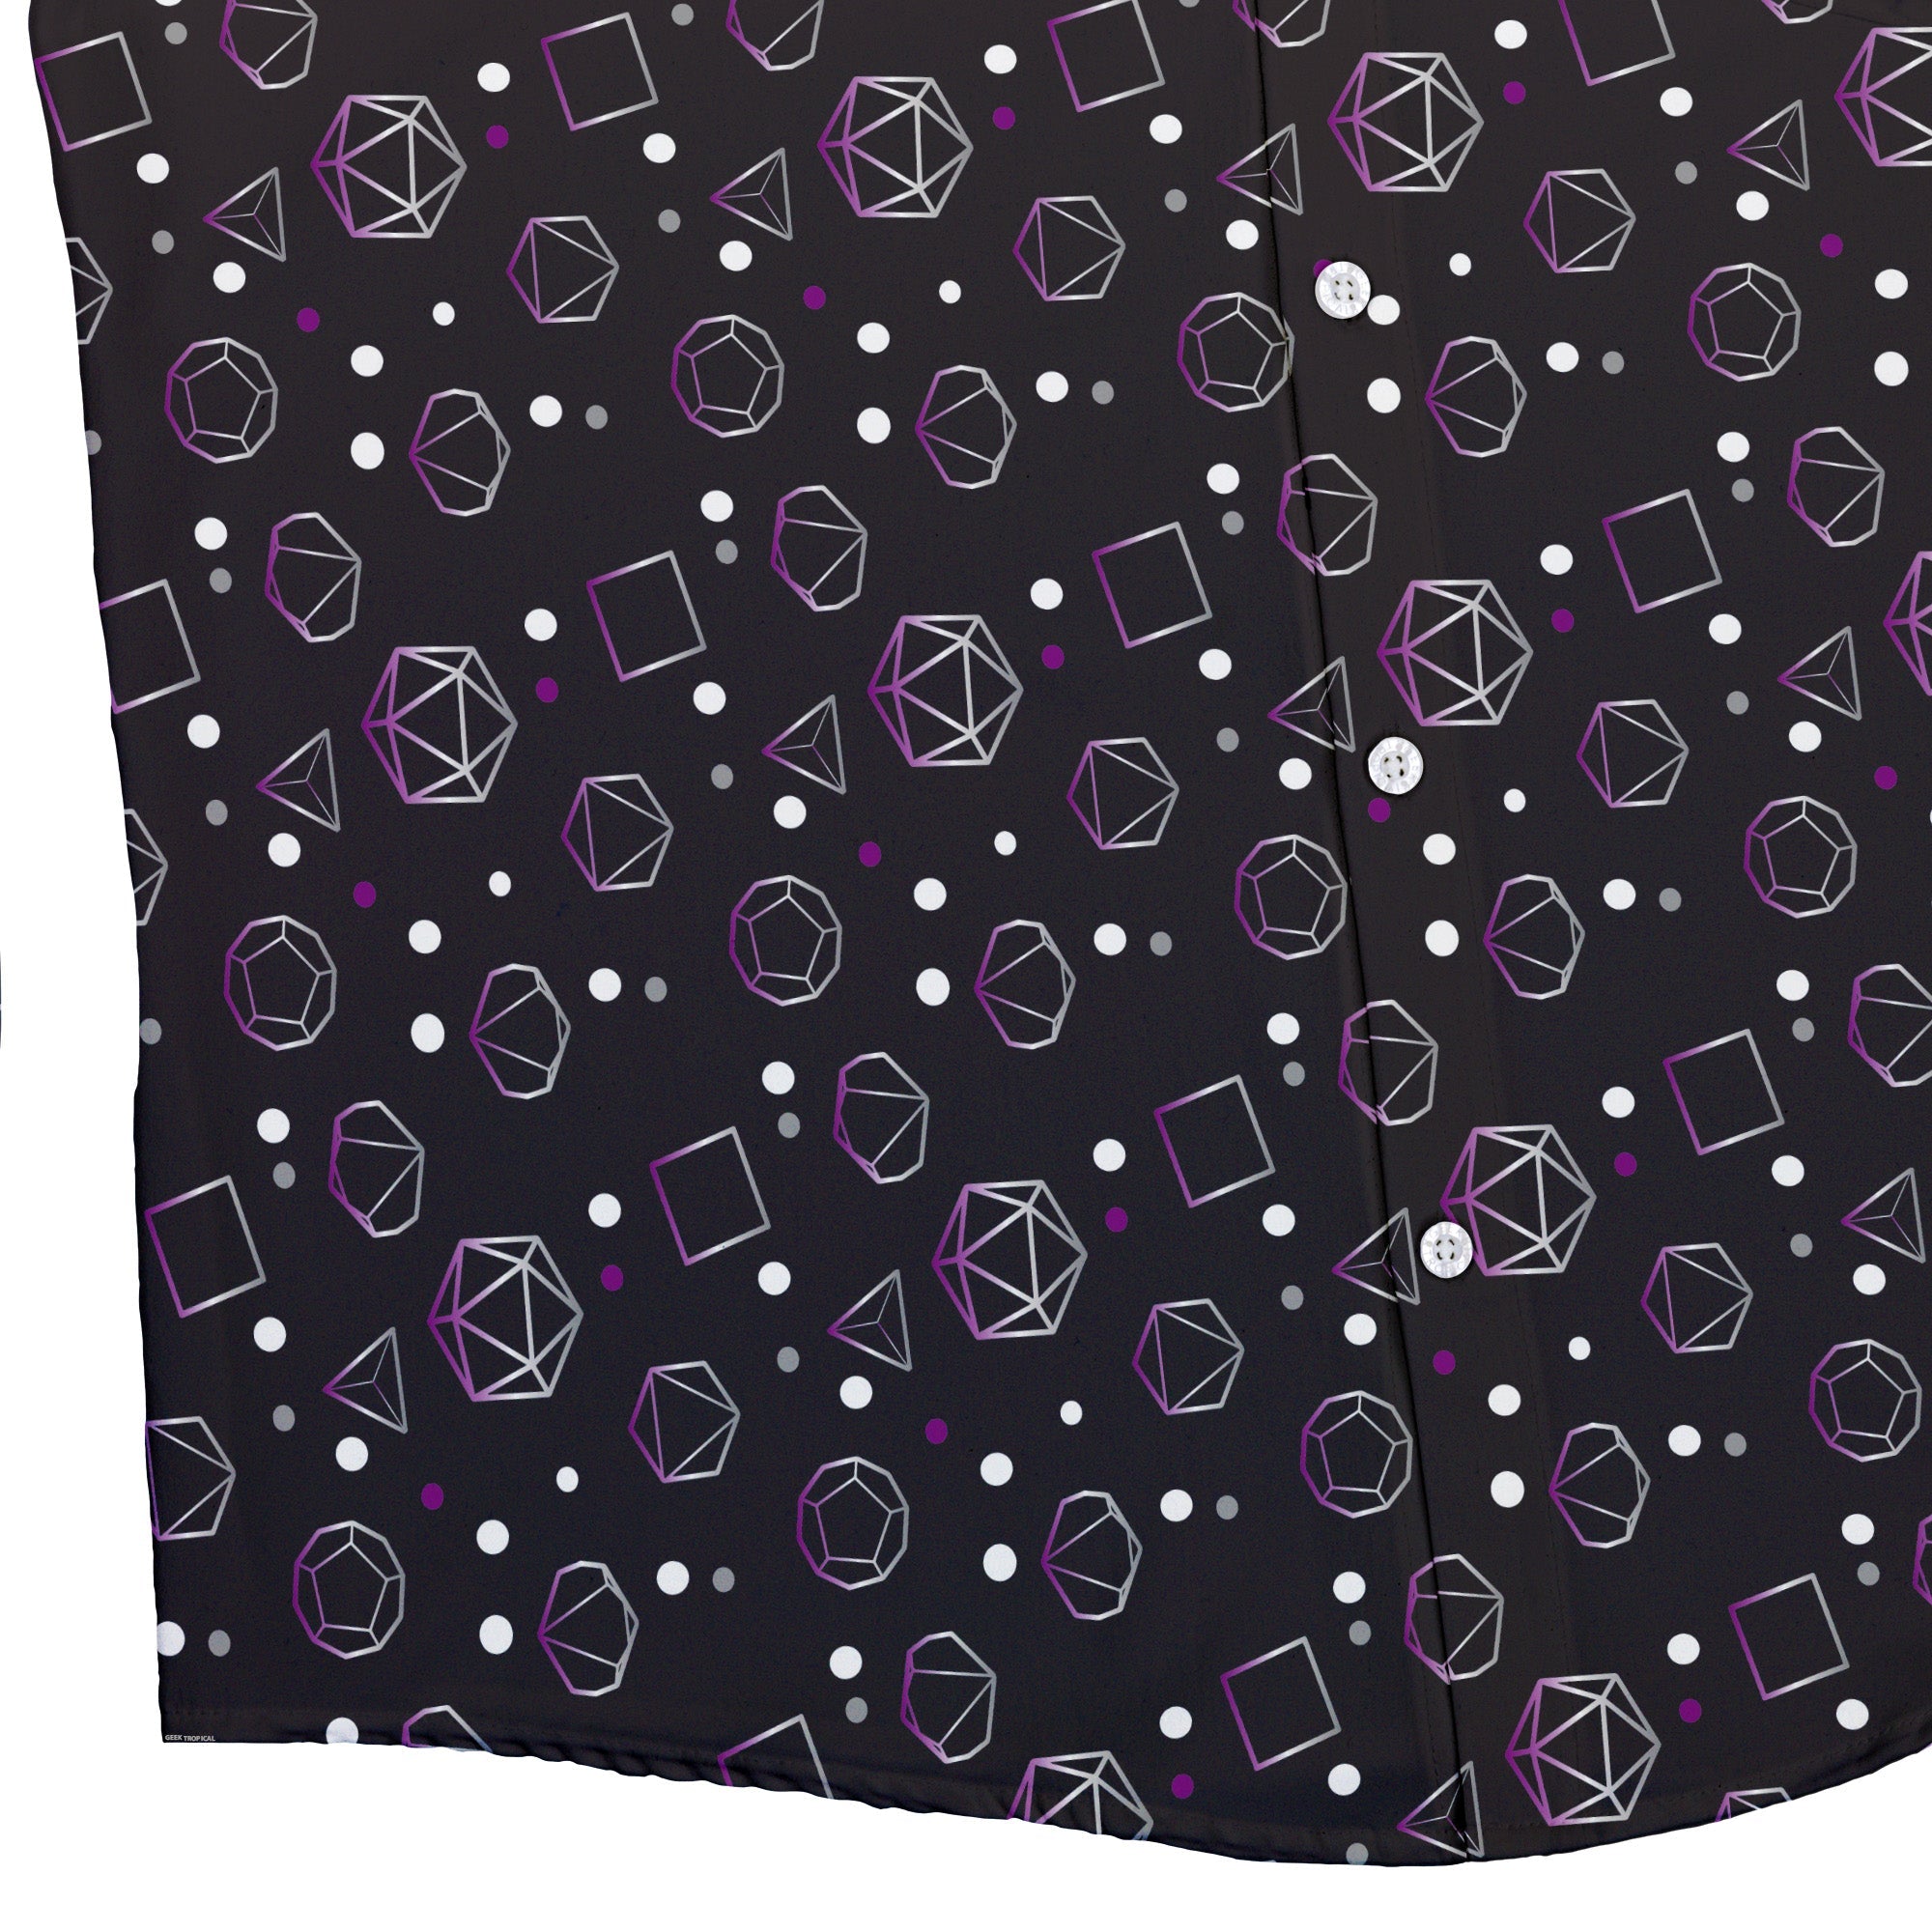 Asexual Pride Flag DND Dice Button Up Shirt - adult sizing - Design by Heather Davenport - dnd & rpg print